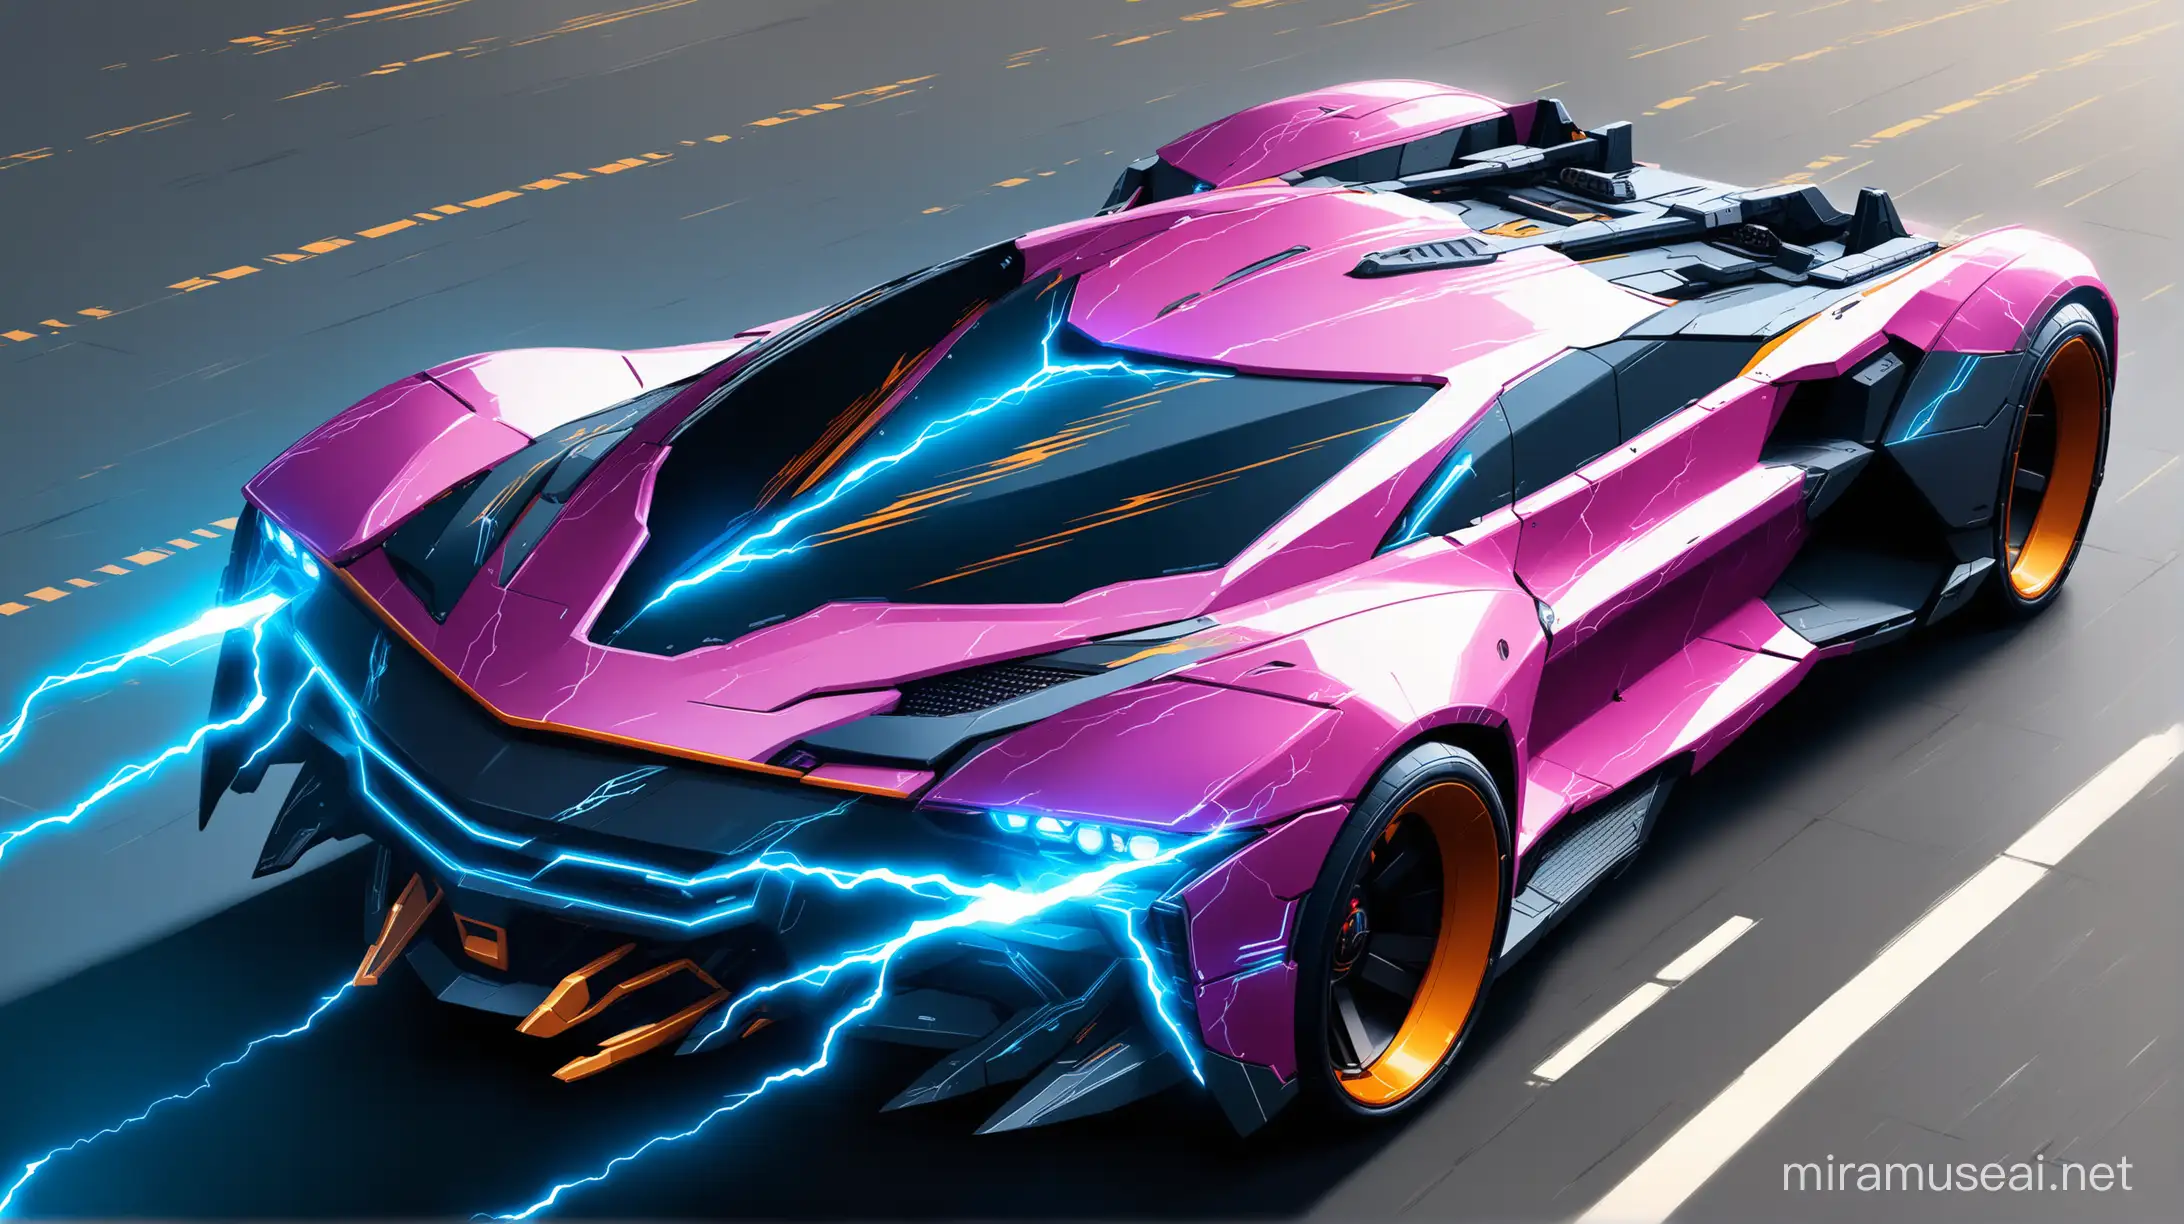 car with realistic colors and the advanced security features of the futuristic model with the weapons in built in it. show the betailing strong with lightning thunders and awesome colors